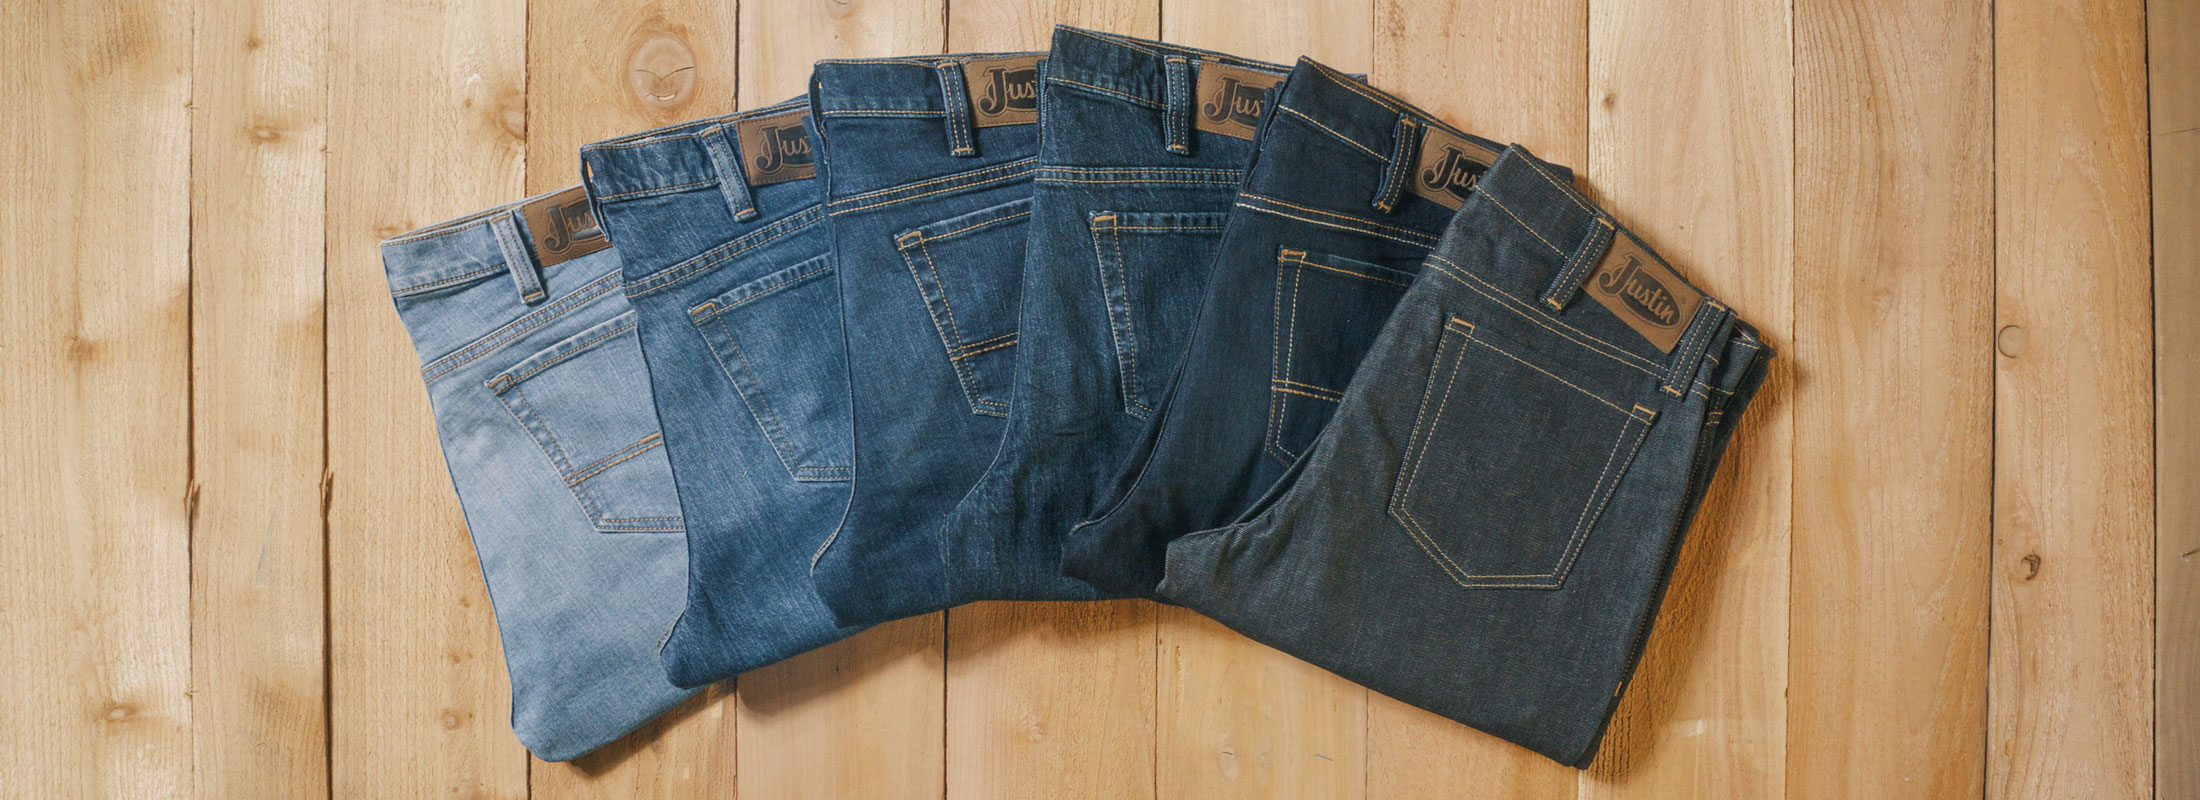 A fan of different washes of jeans ranging from light to dark denim laying on a wood background.